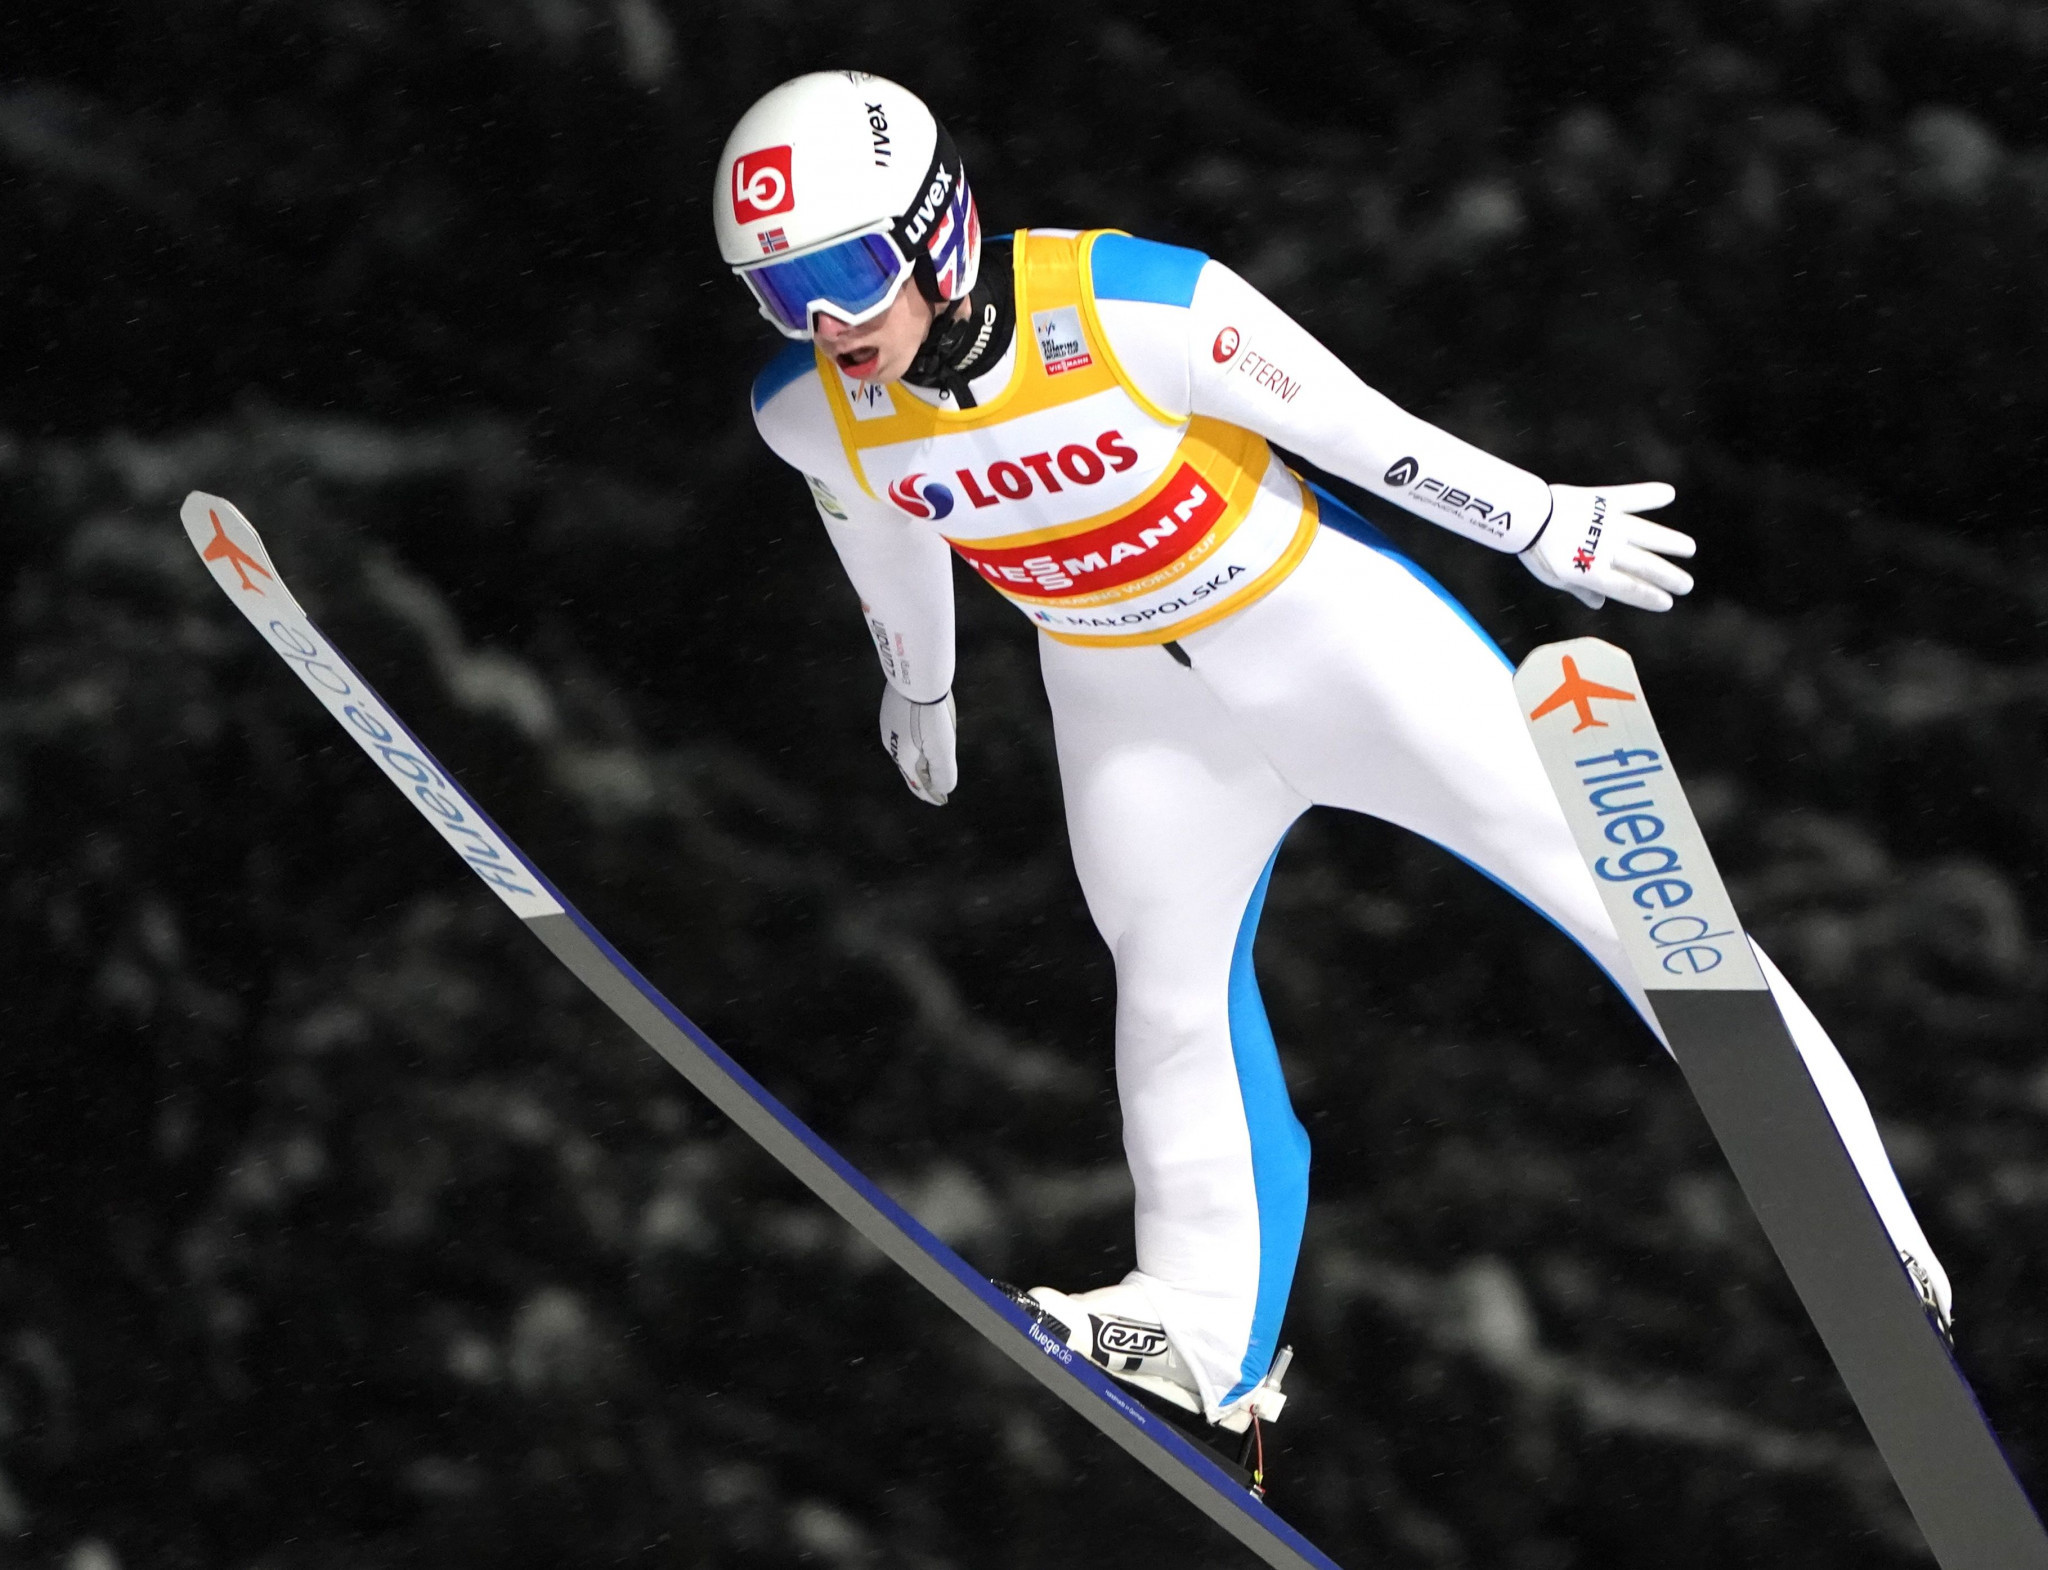 Granerud looks to extend Ski Jumping World Cup lead in Lahti